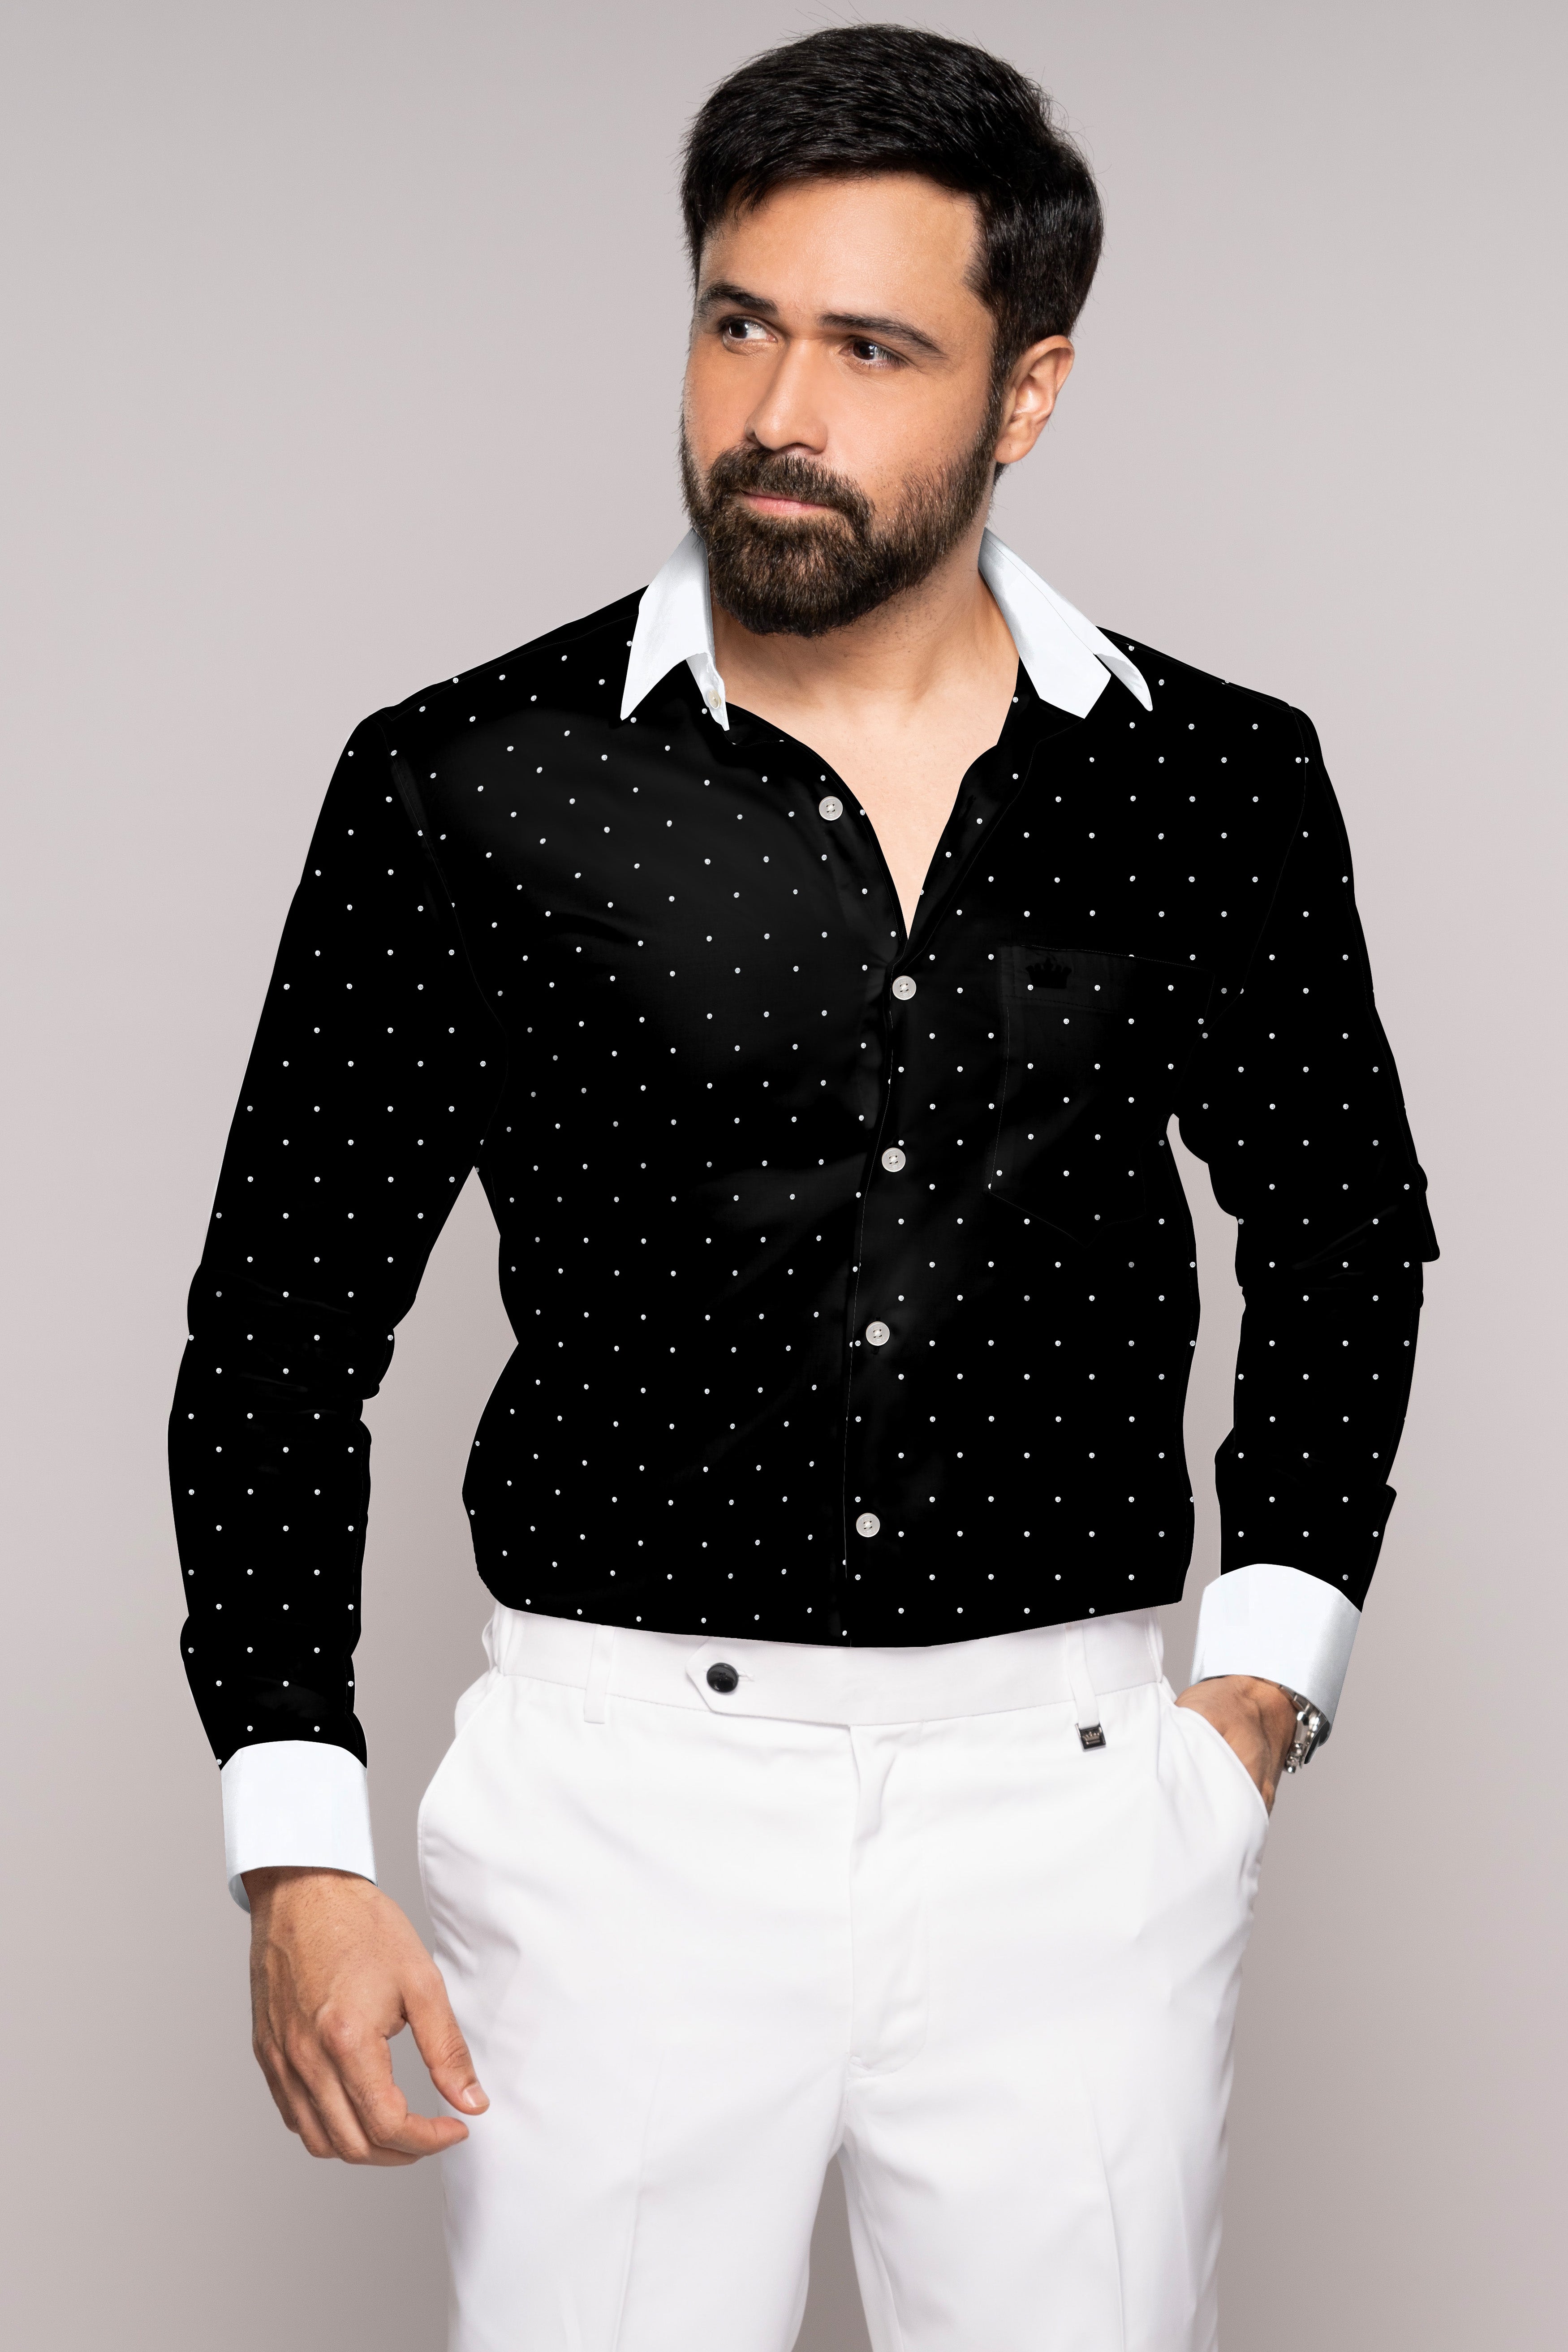 Jade Black Polka Dotted with White Cuffs and Collar Super Soft Premium Cotton Shirt